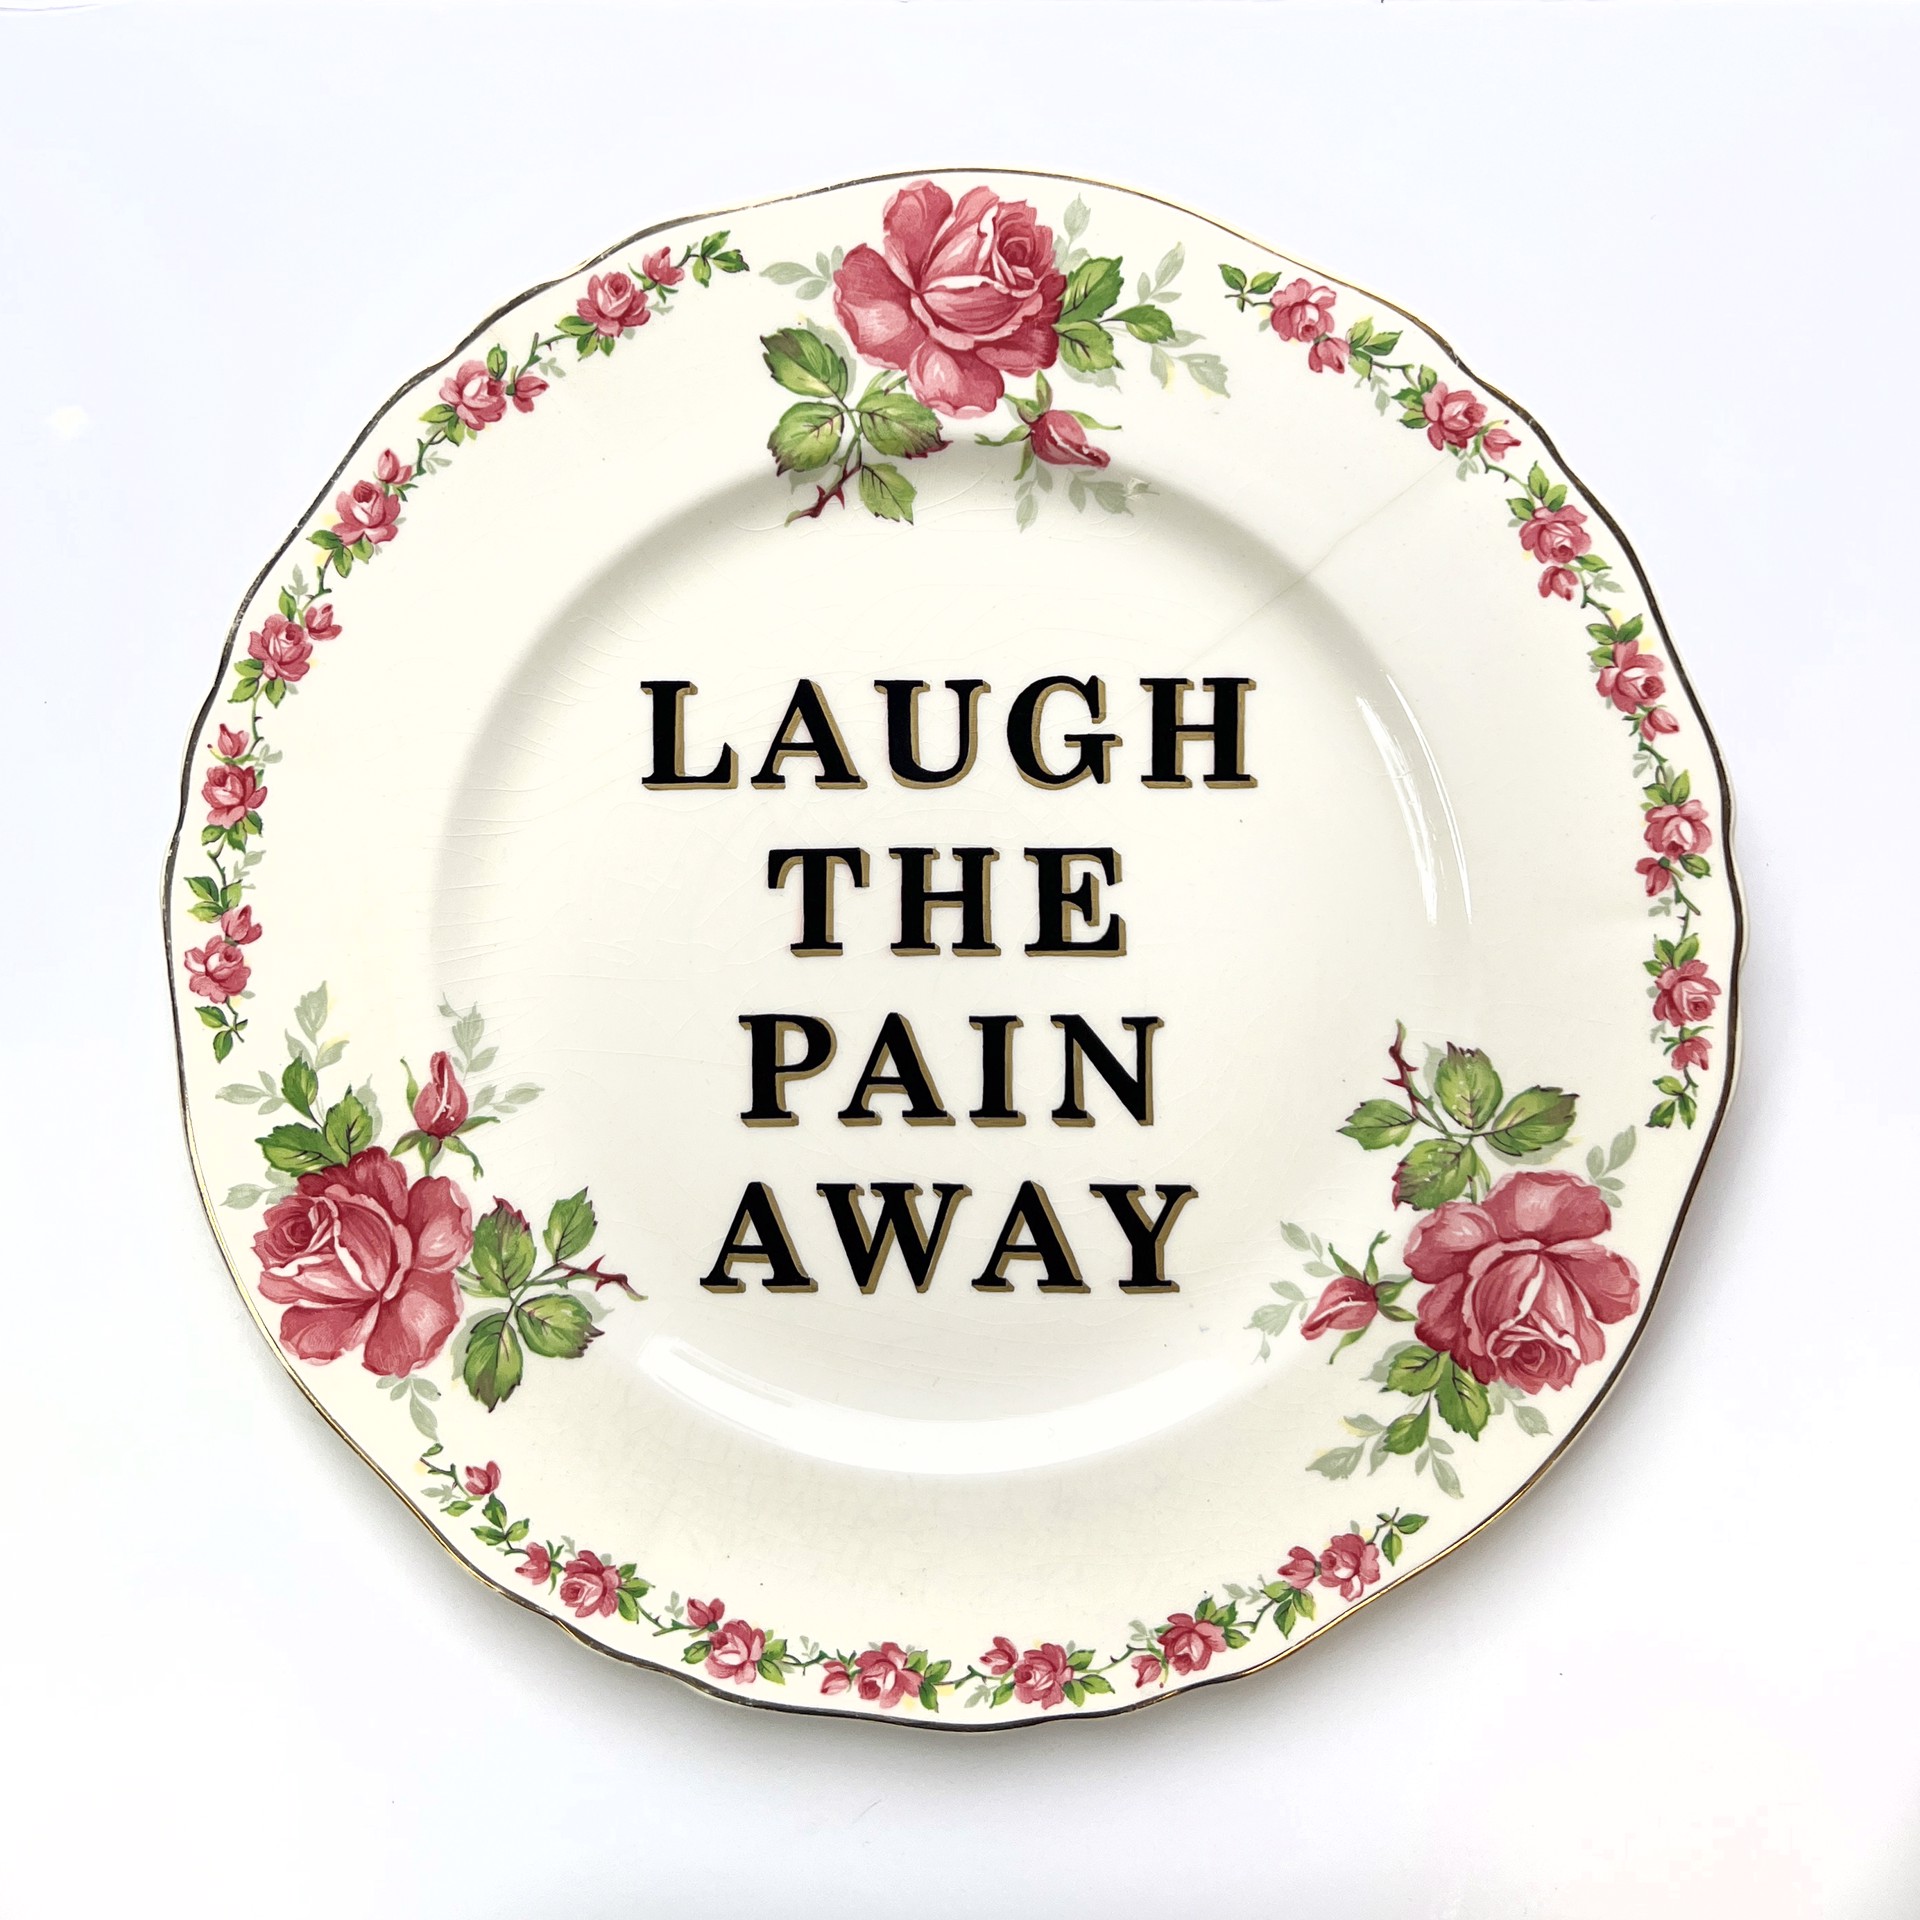 Laugh the pain away by Marie-Claude Marquis